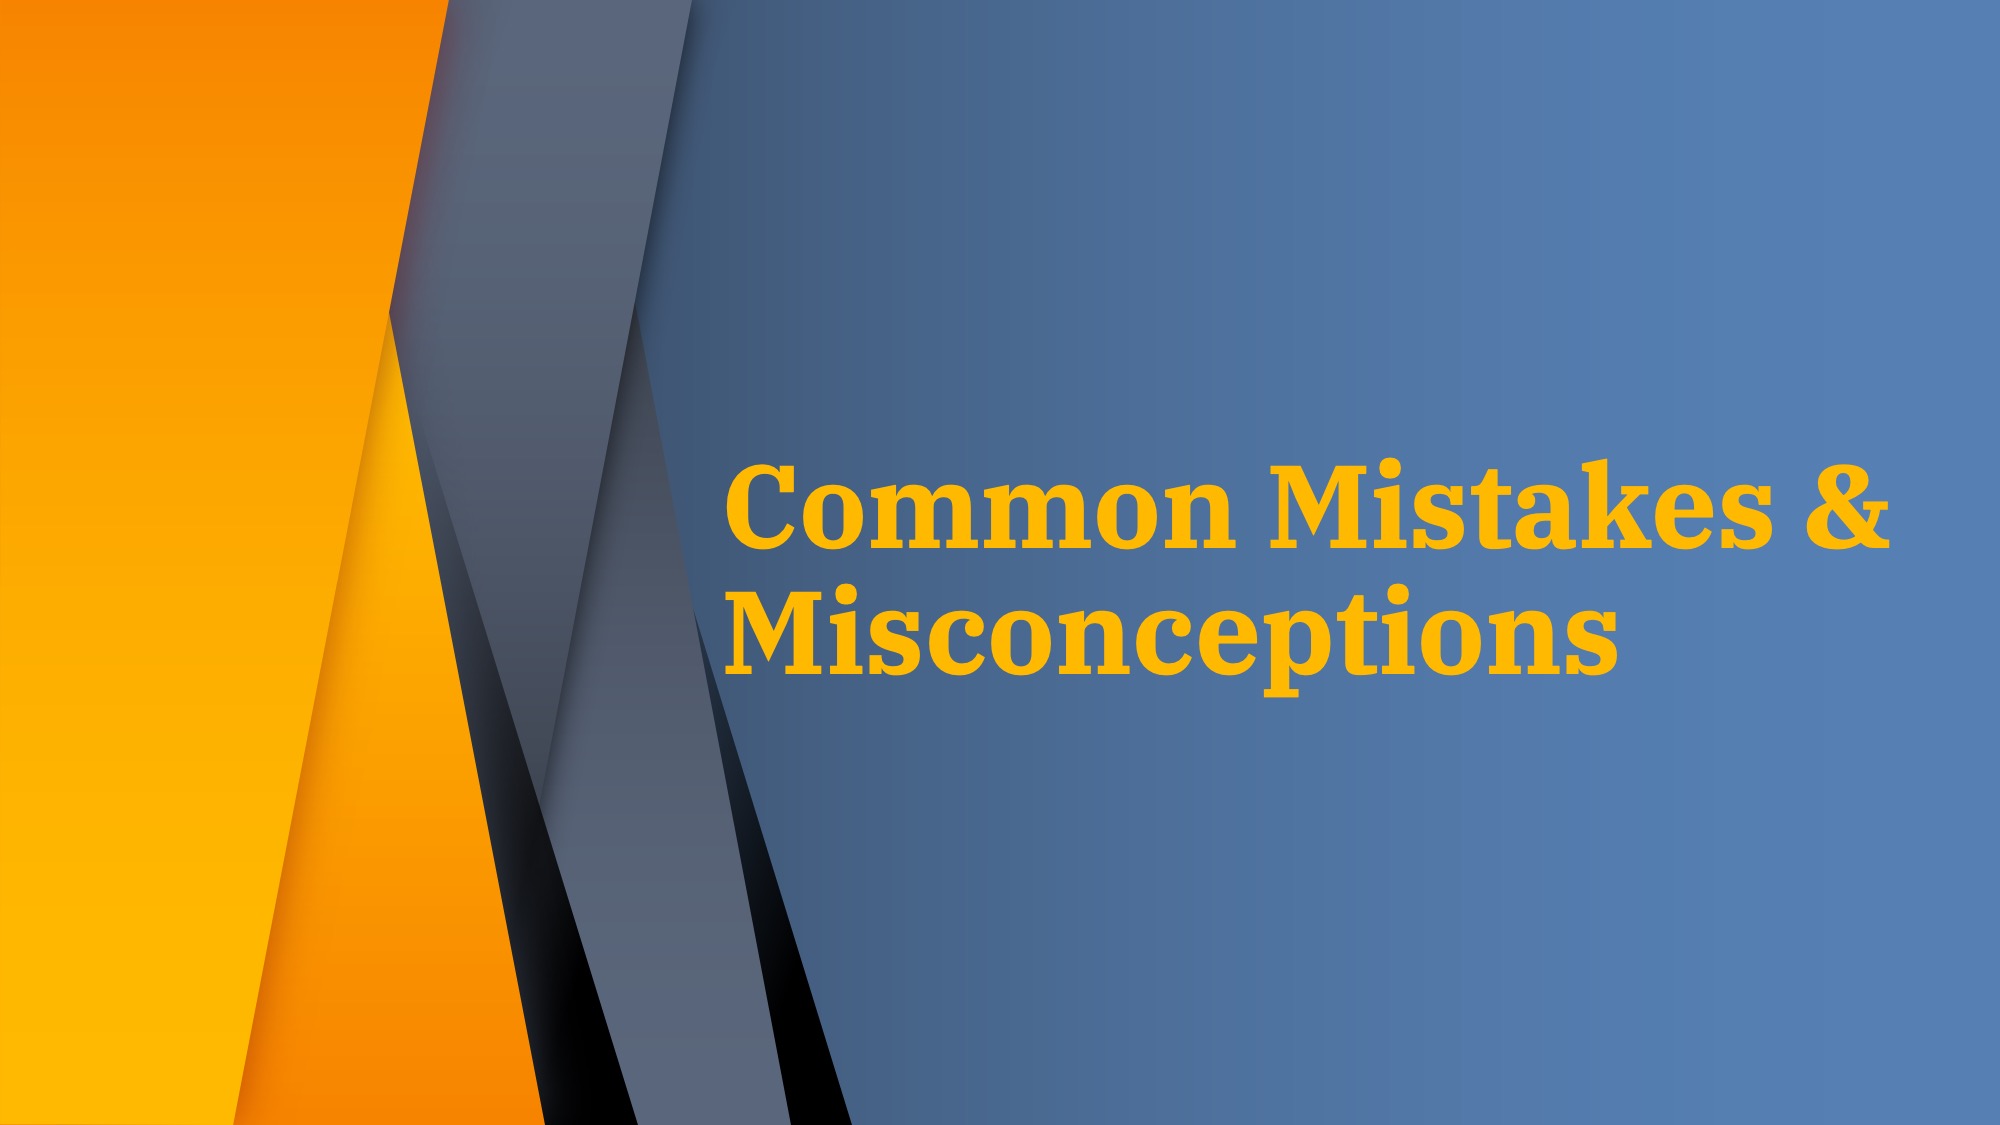 International expansion - common mistakes & misconceptions